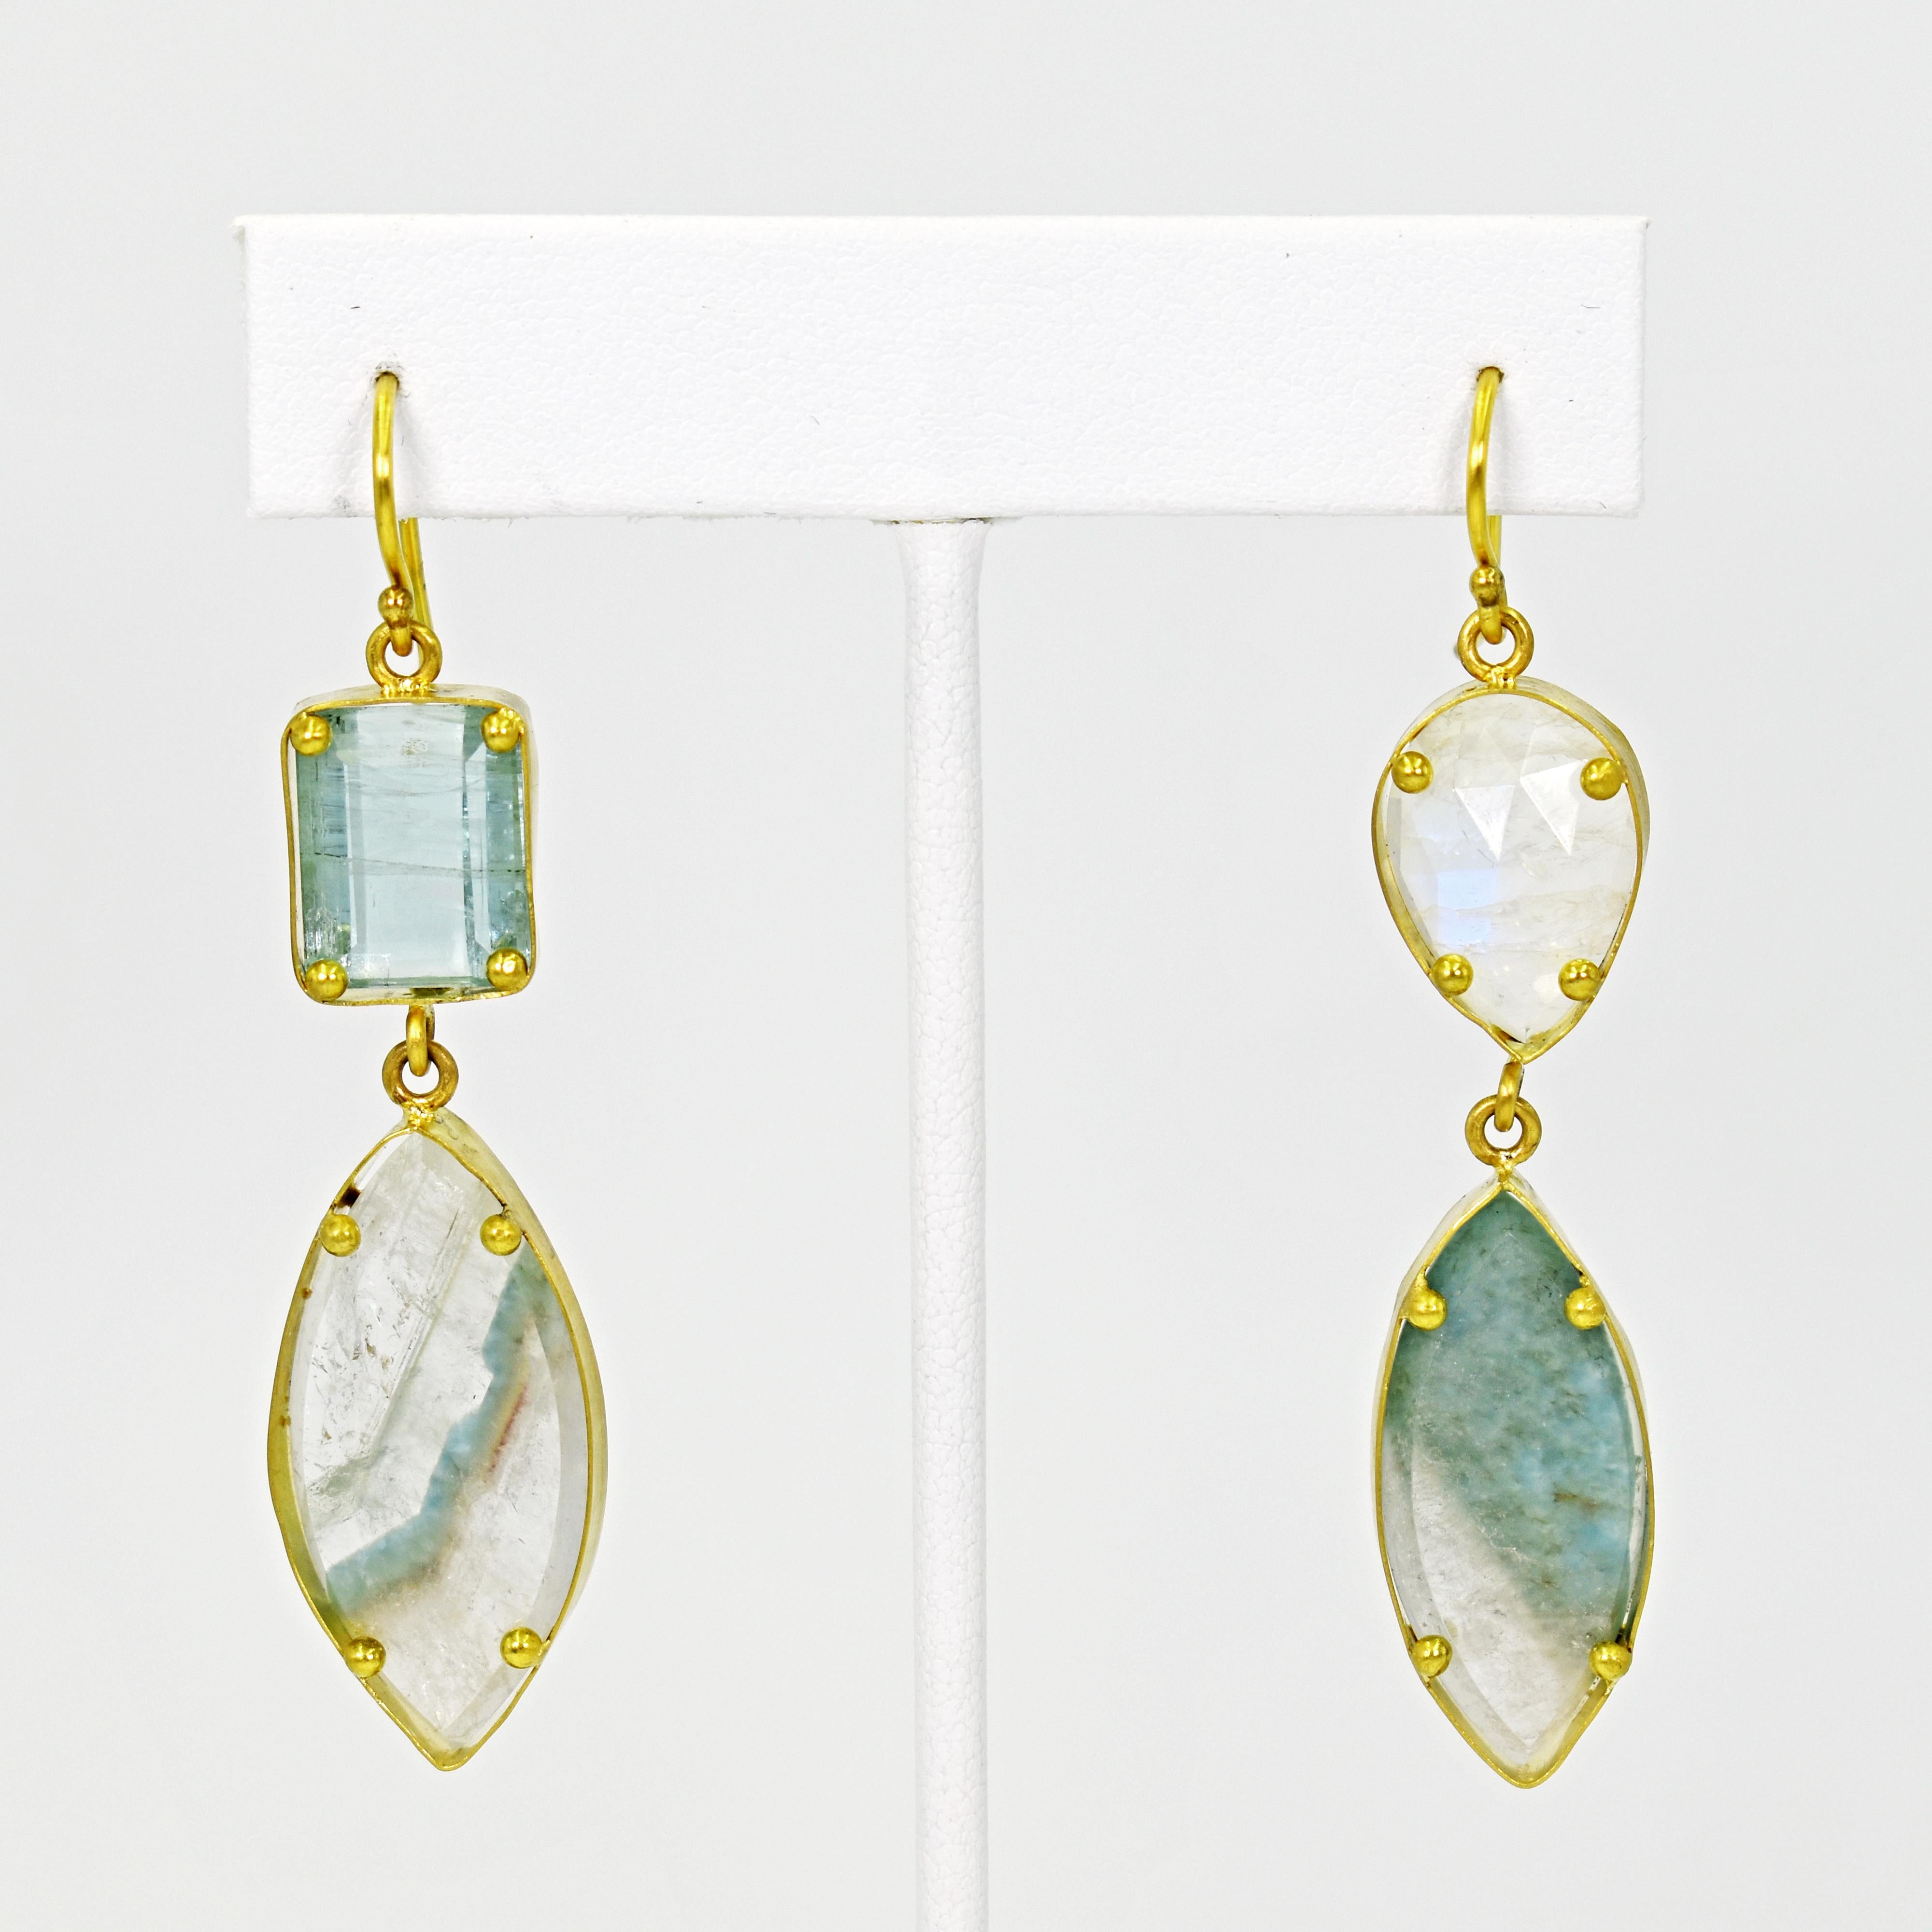 Handmade, one-of-a-kind 22k yellow gold two-tier asymmetrical dangle earrings featuring an emerald cut Aquamarine, rose cut pear shaped Moonstone, and two Paraiba Tourmaline in matrix slices. Earrings are 2.5 inches in total length. Beautiful sea